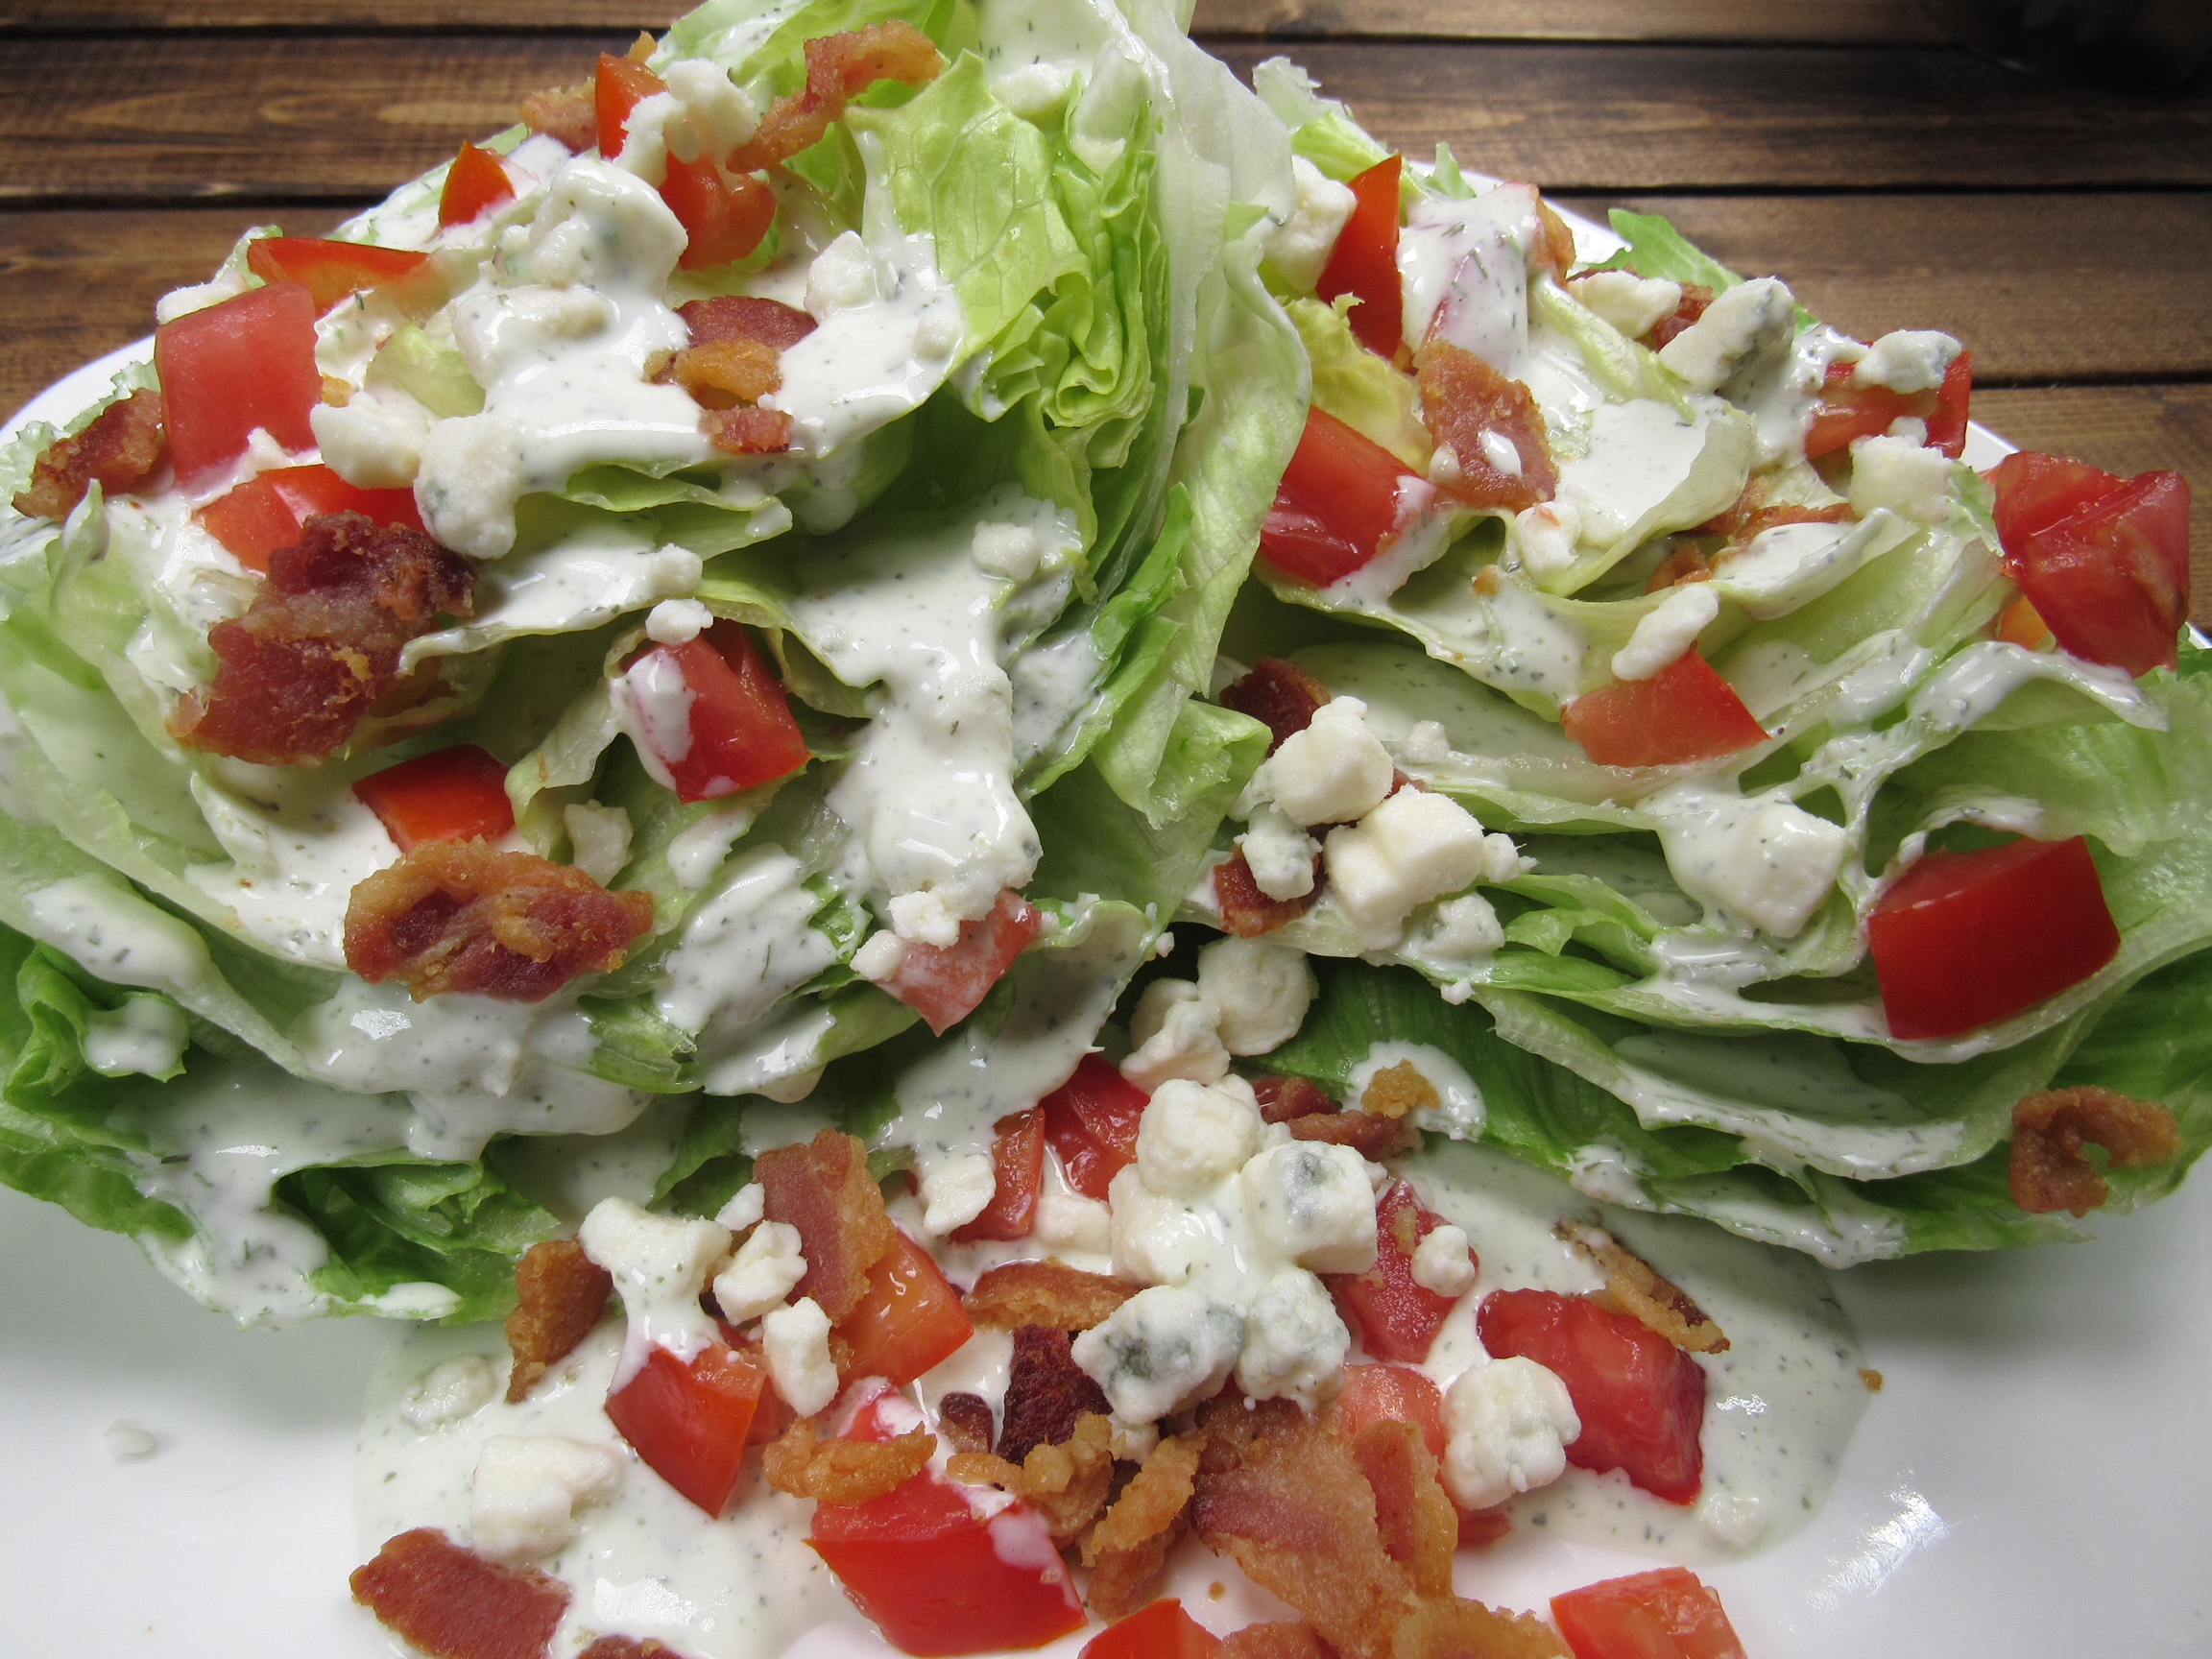 Blue Cheese Dressing picture photo